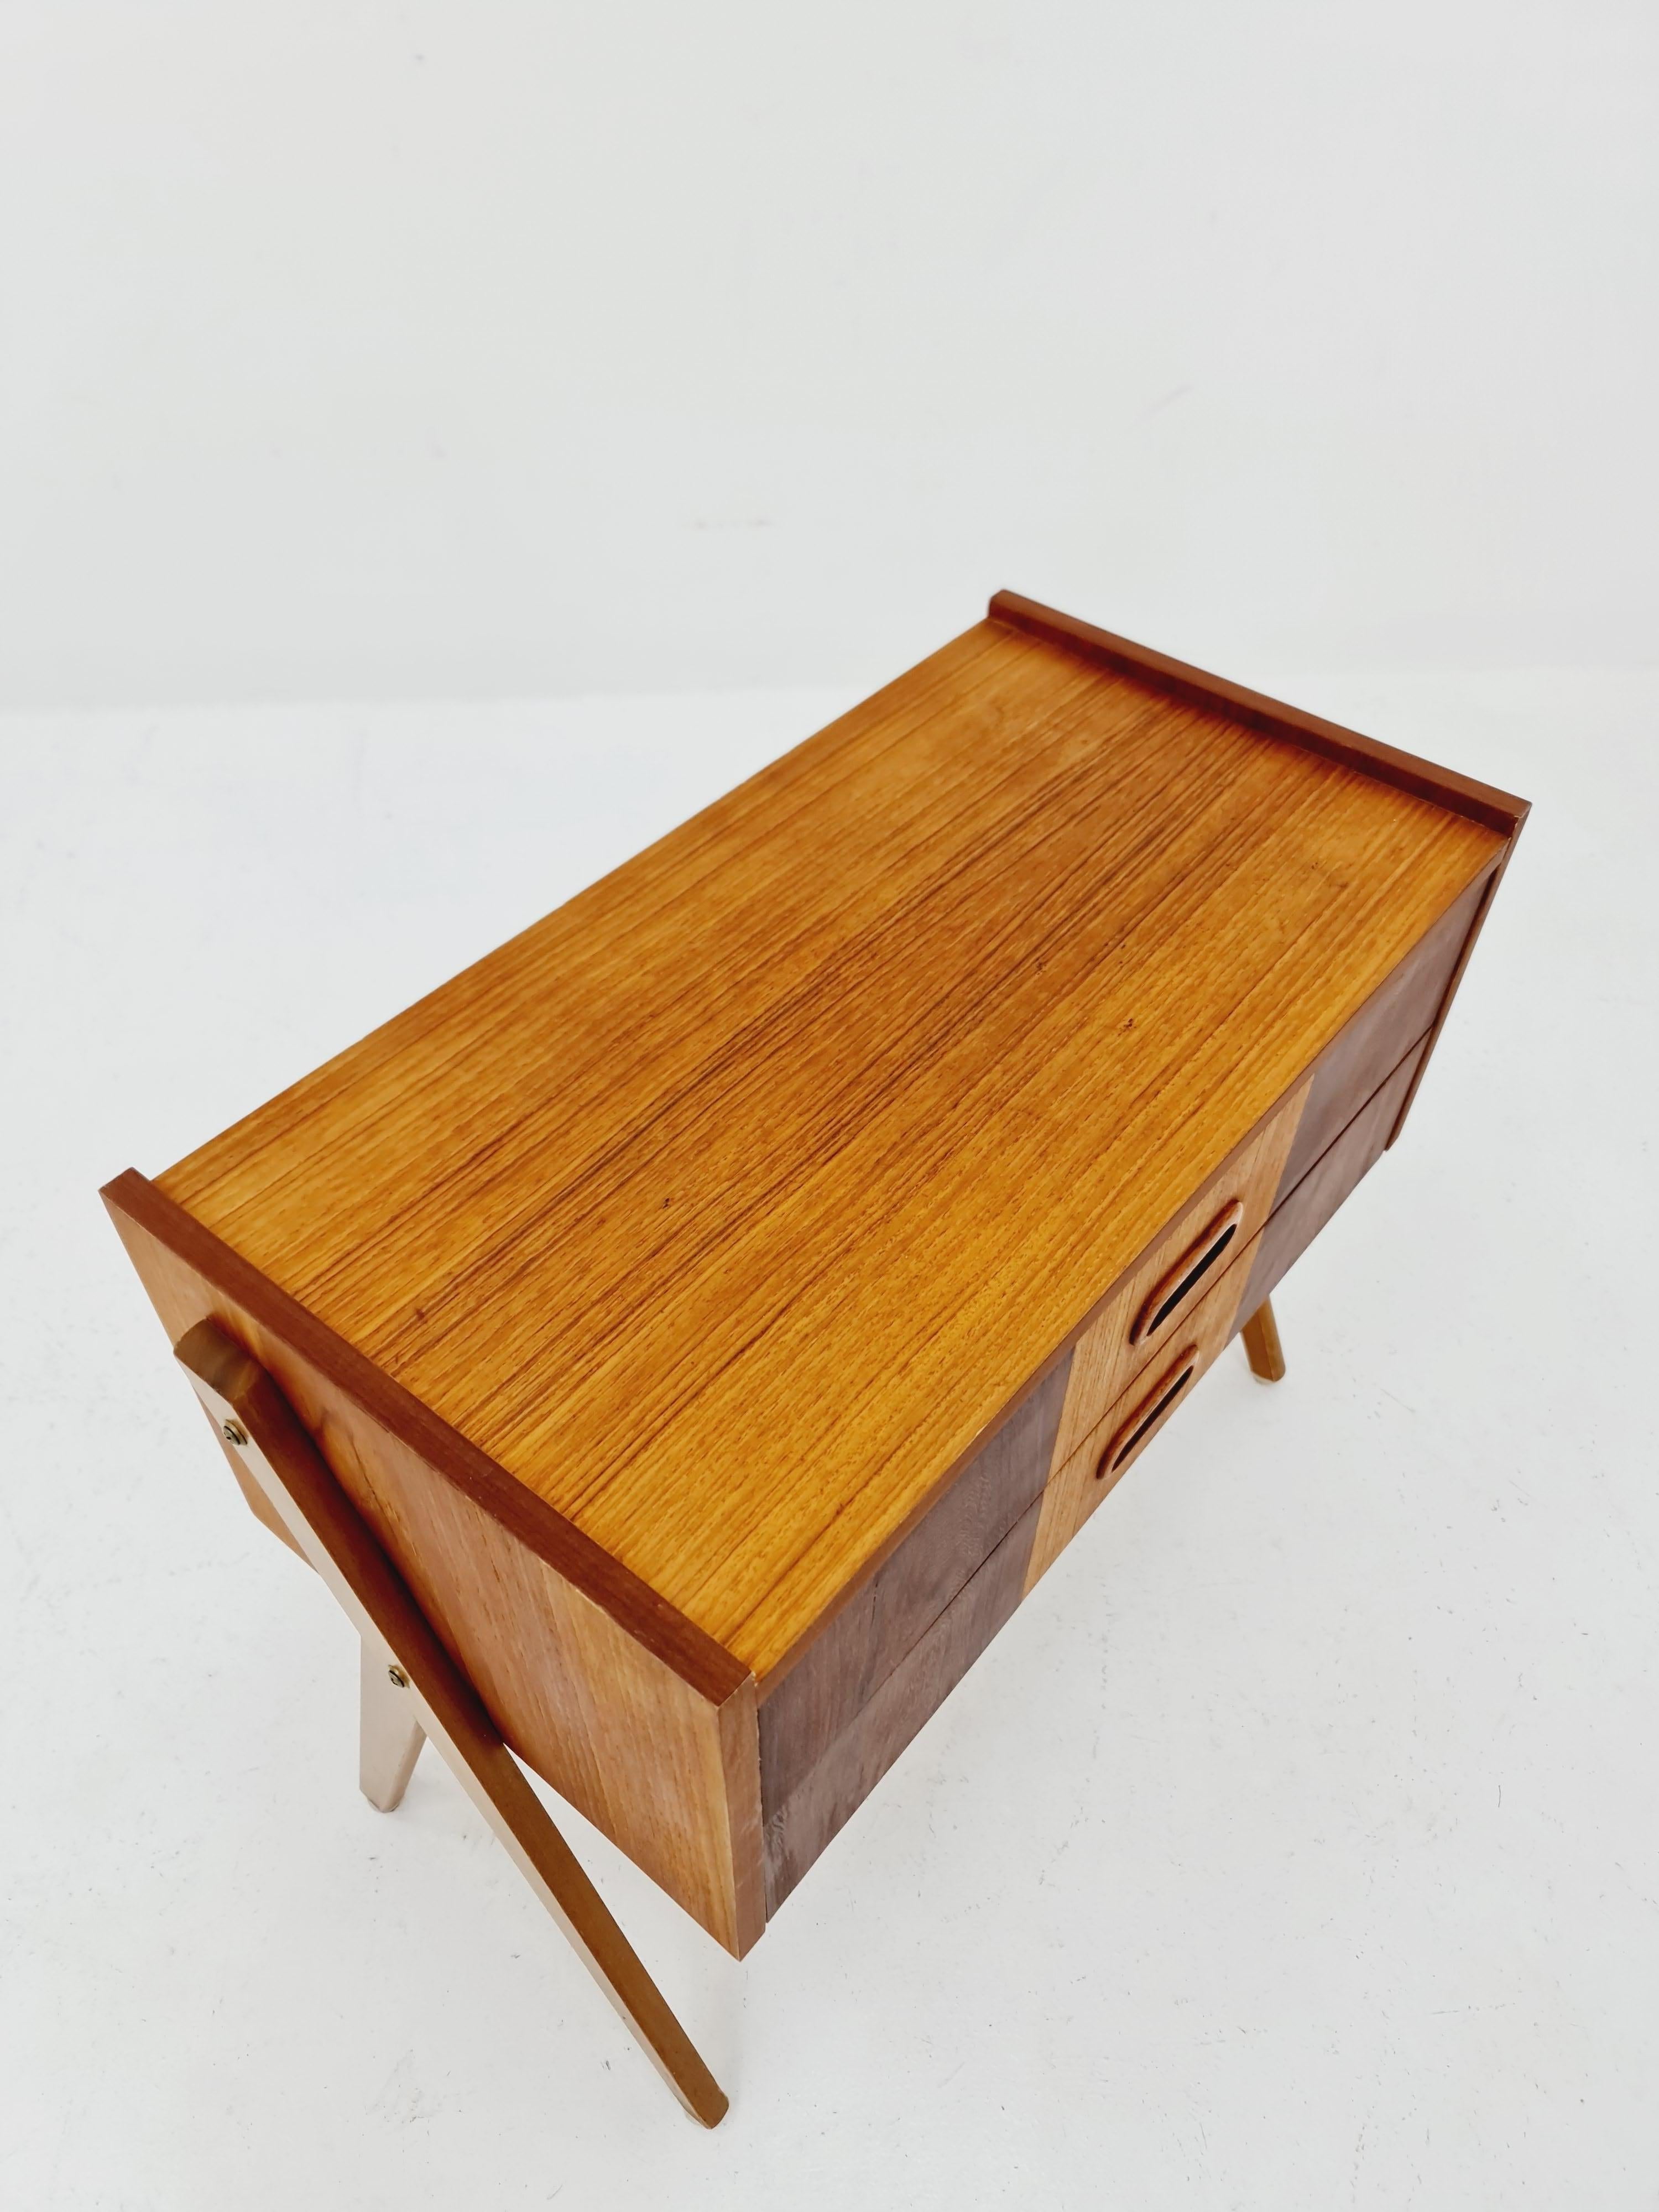 Midcentury Danish teak & Rosewood vintage Side table/ Bedside table/ Night stand In Good Condition For Sale In Gaggenau, DE